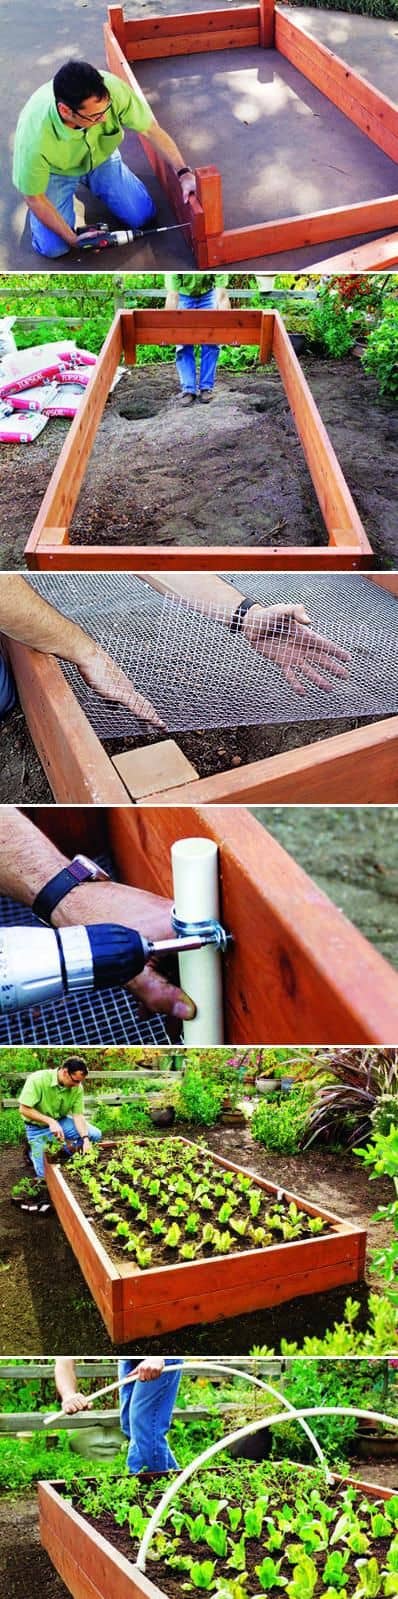 Raised Bed assemble | How to Build a Raised Vegetable Garden Bed | 39+ Simple & Cheap Raised Vegetable Garden Bed Ideas - farmfoodfamily.com